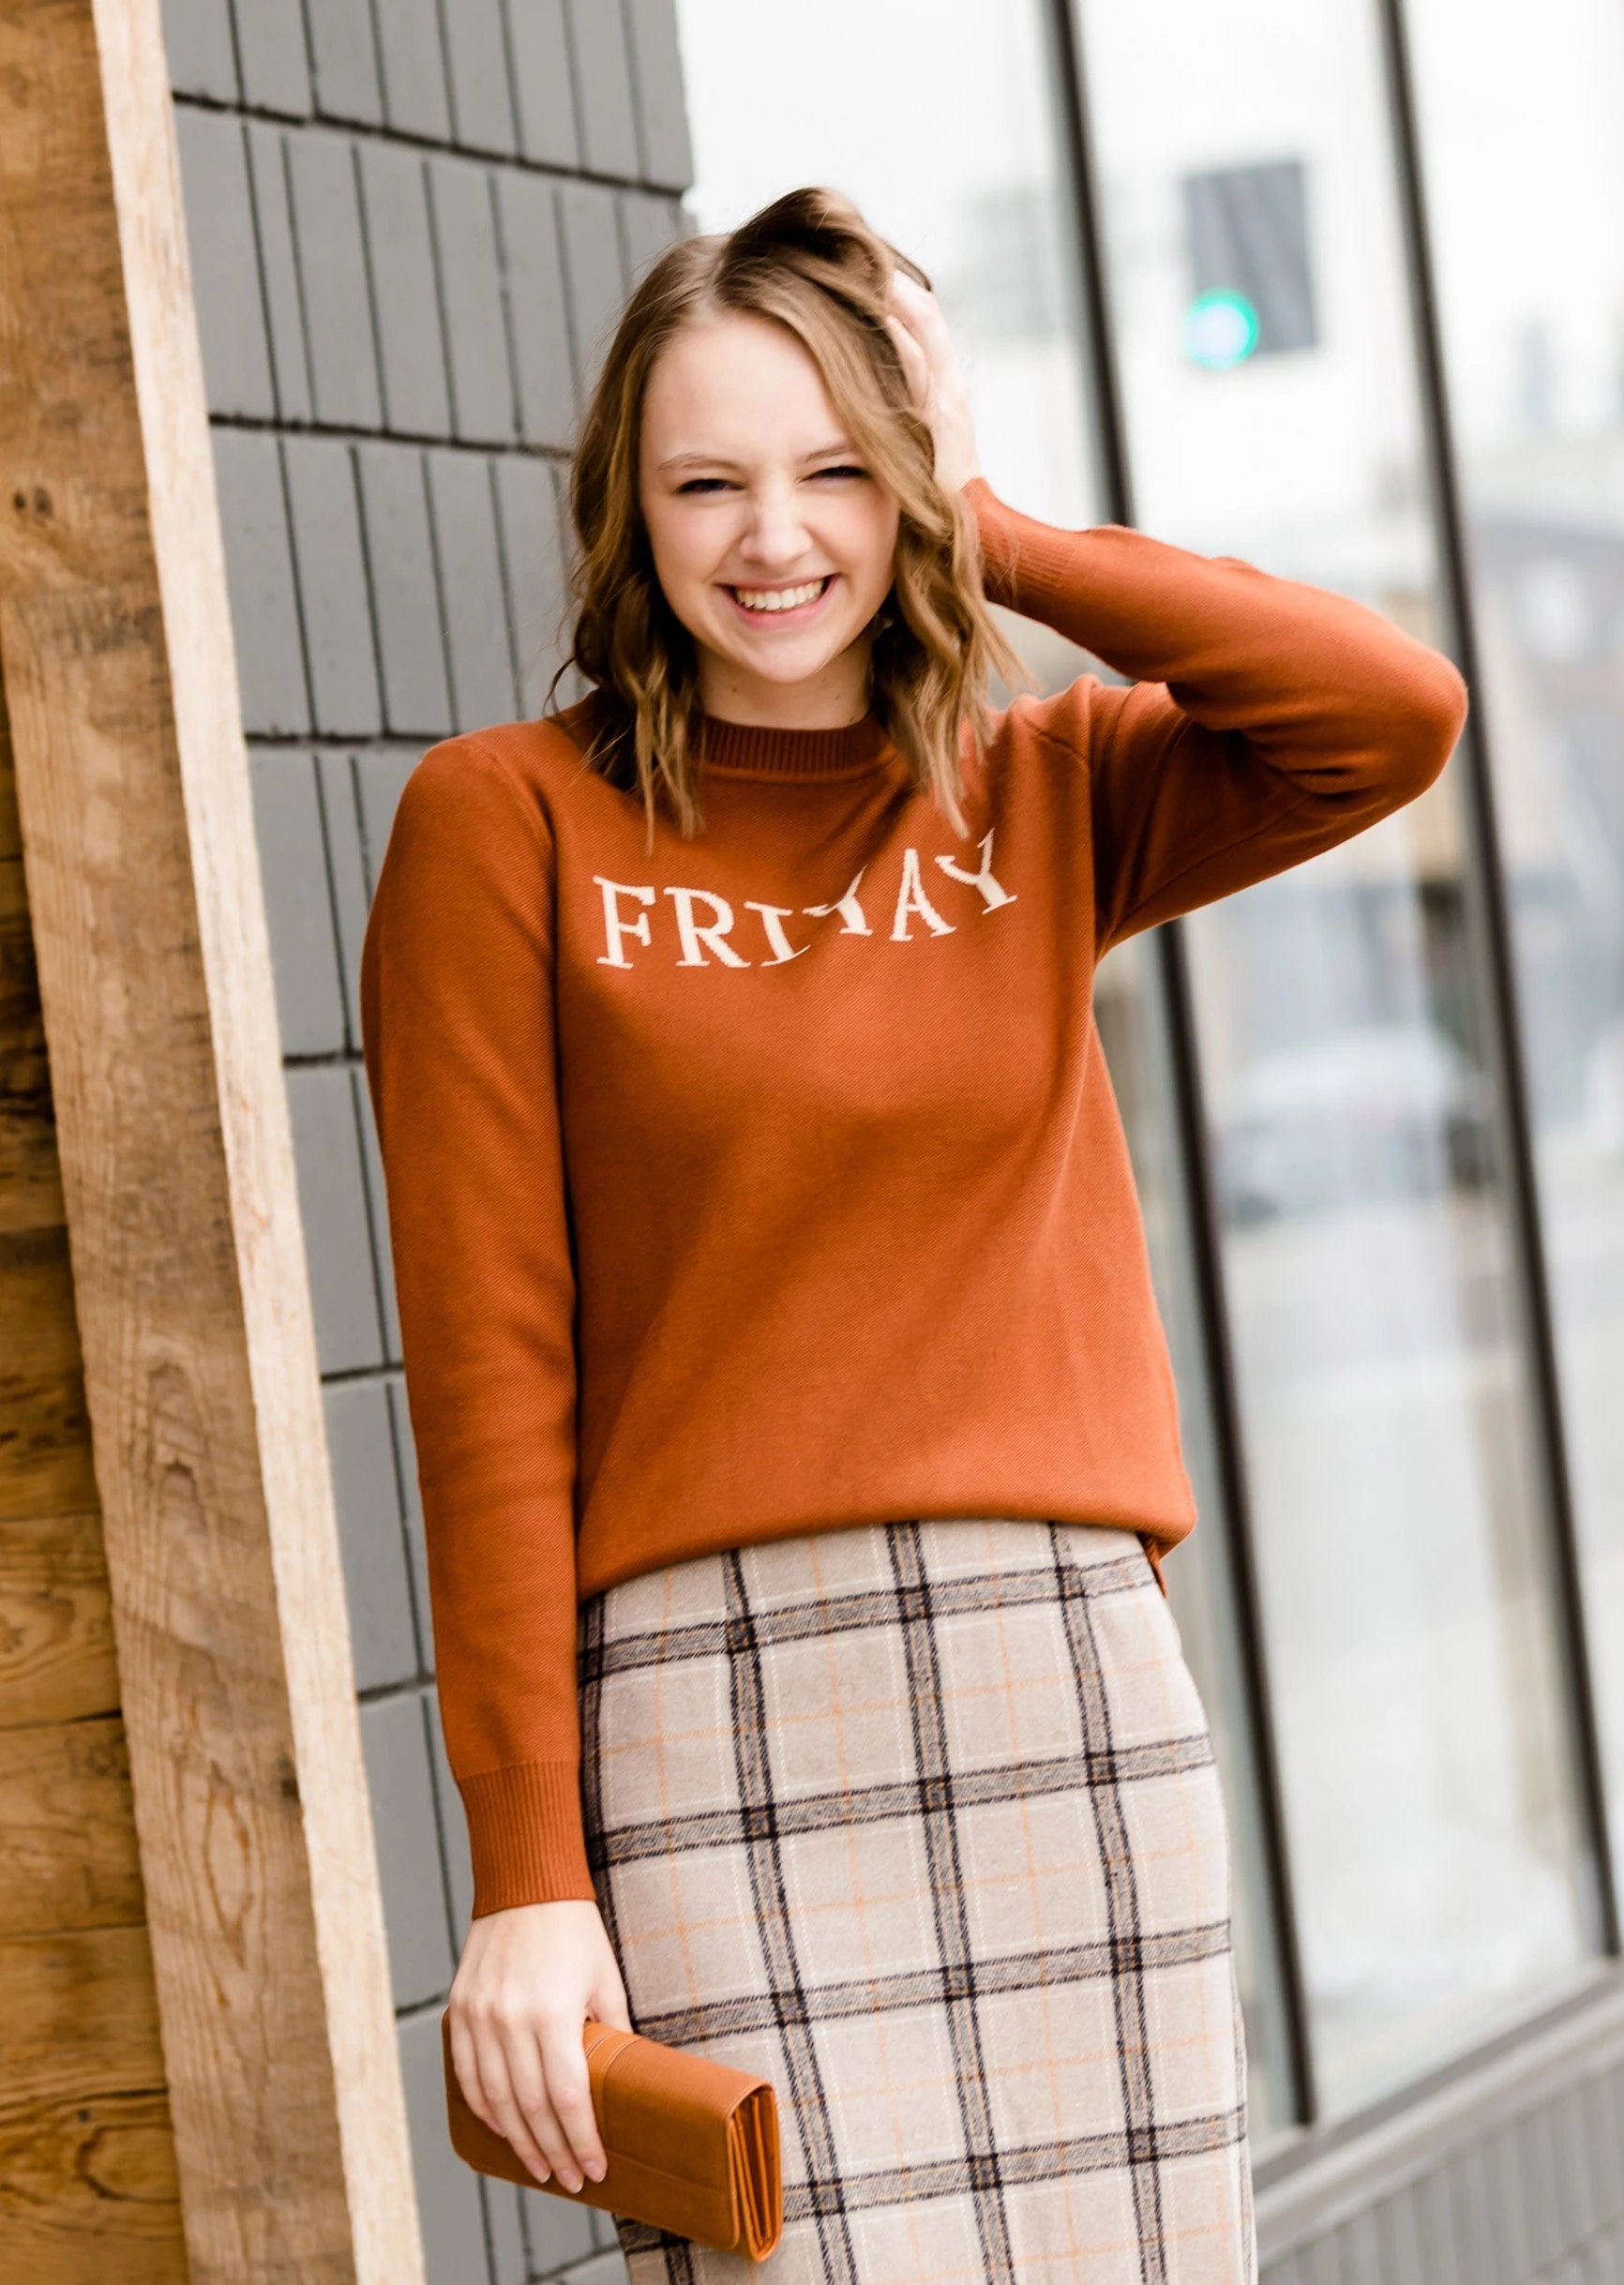 Friyay Graphic Sweater-FINAL SALE Tops